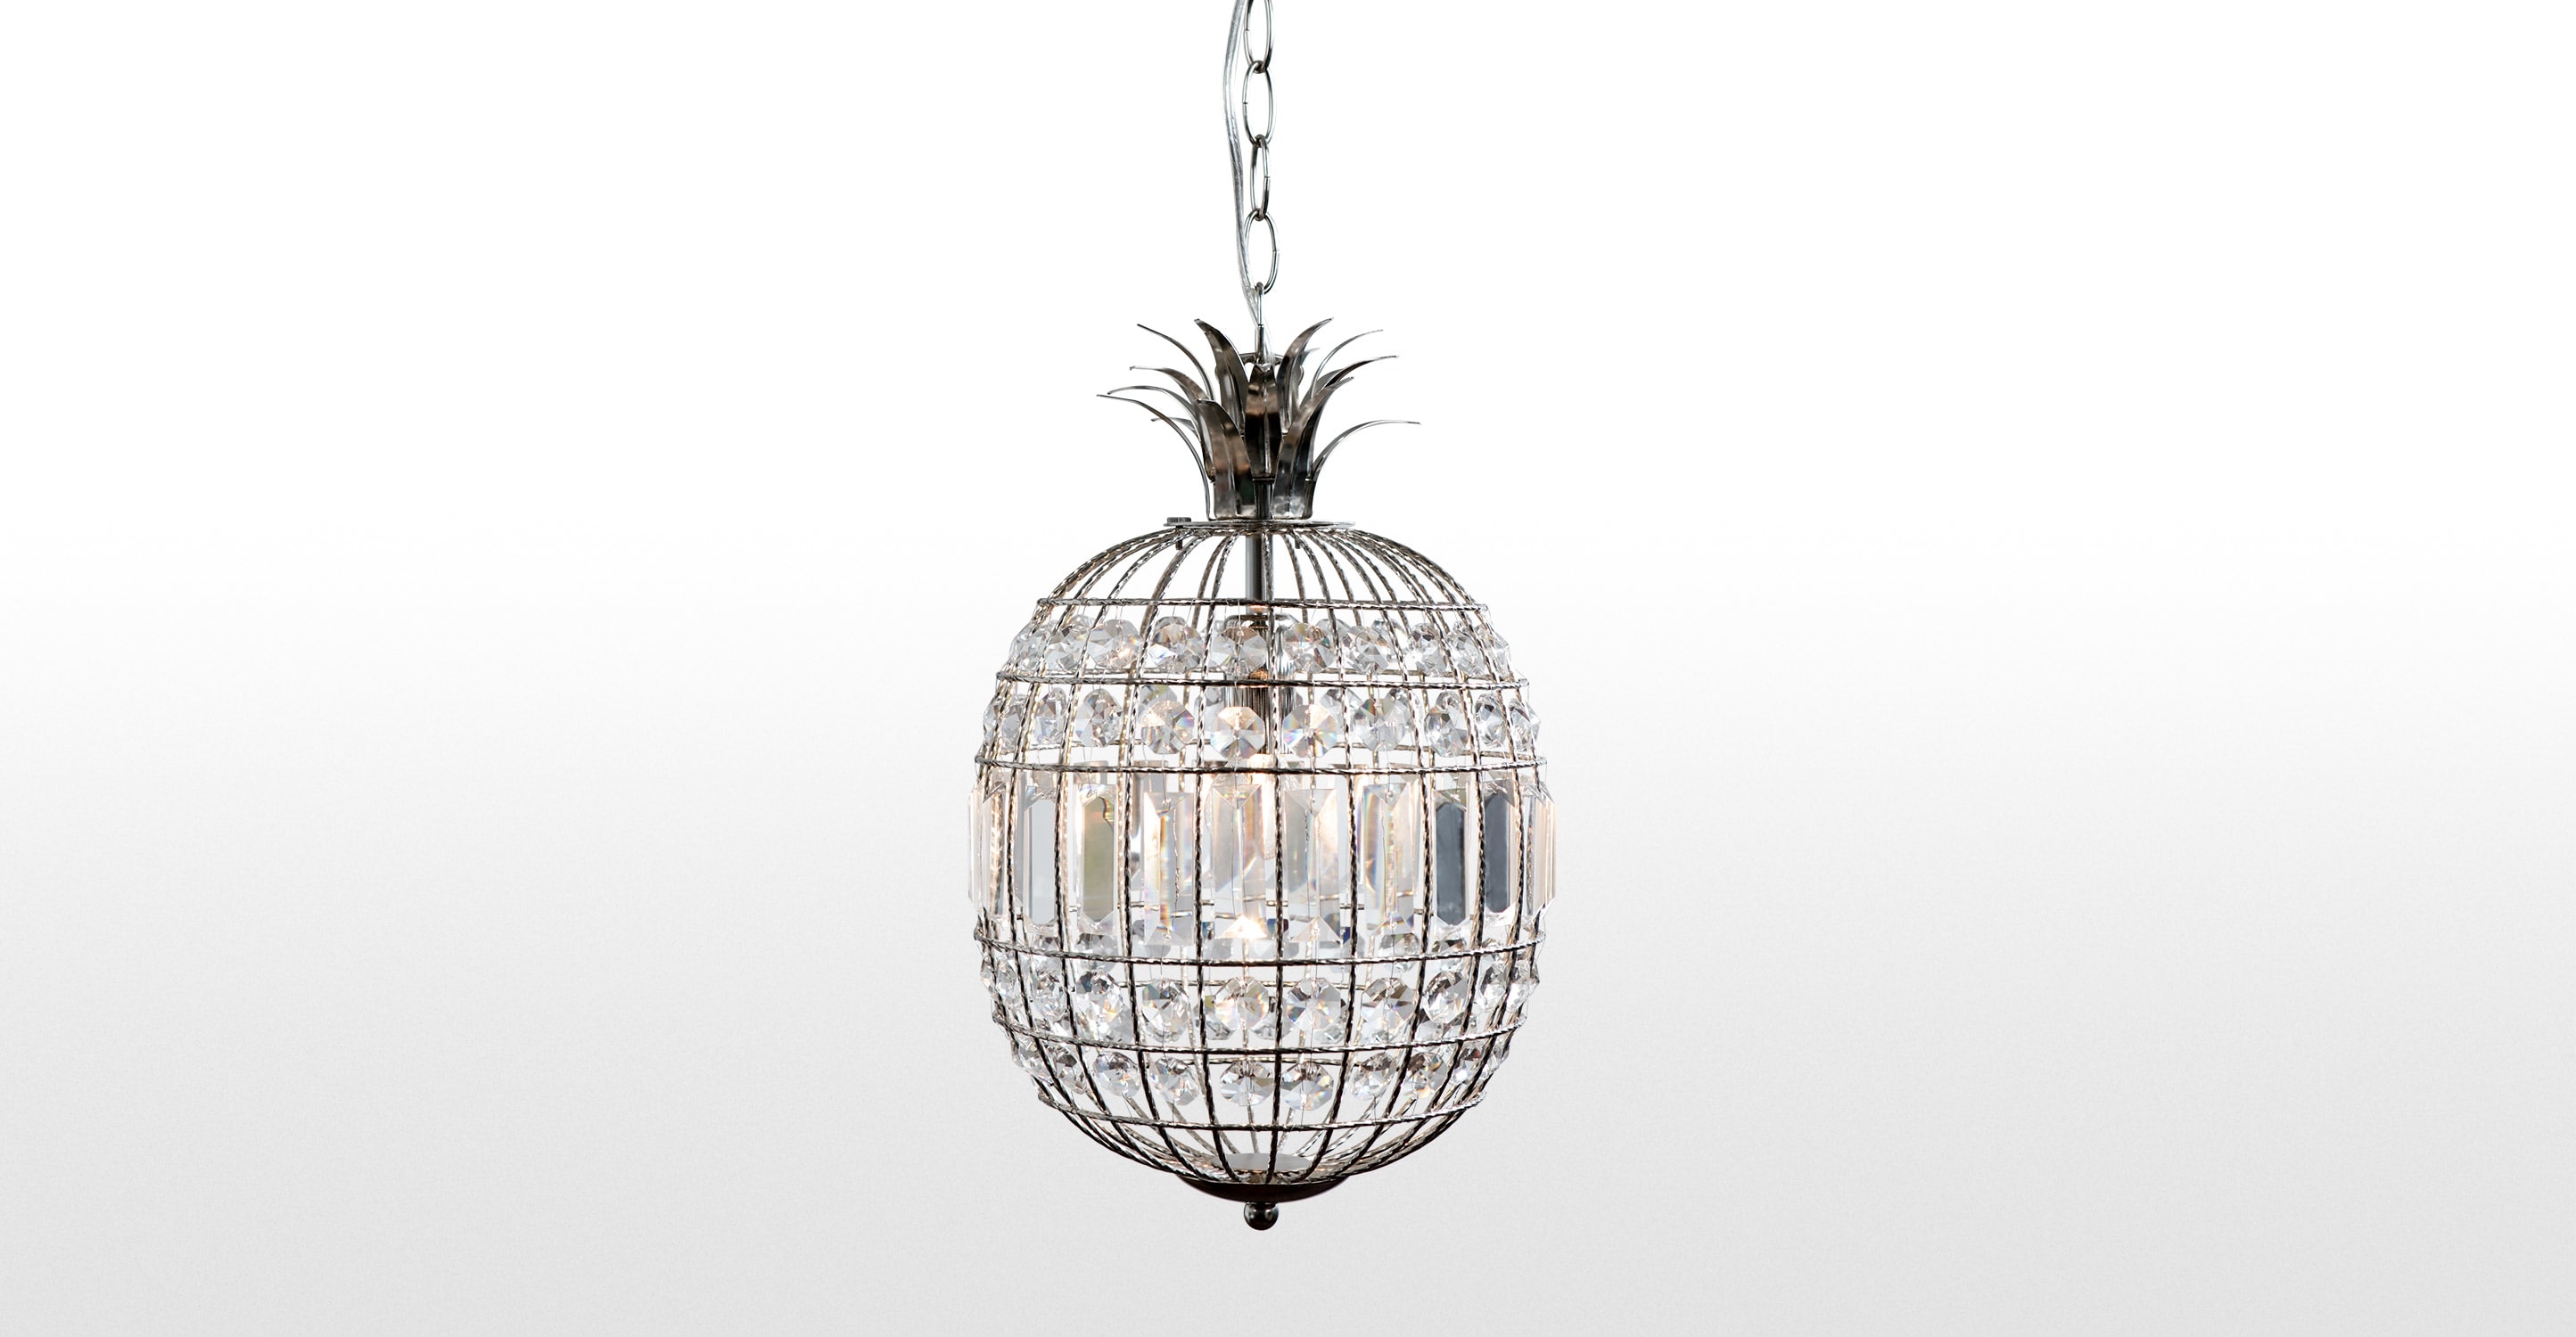 Pineapple Ceiling Light Nextmiranda pendant chandelier clear glass and nickel made